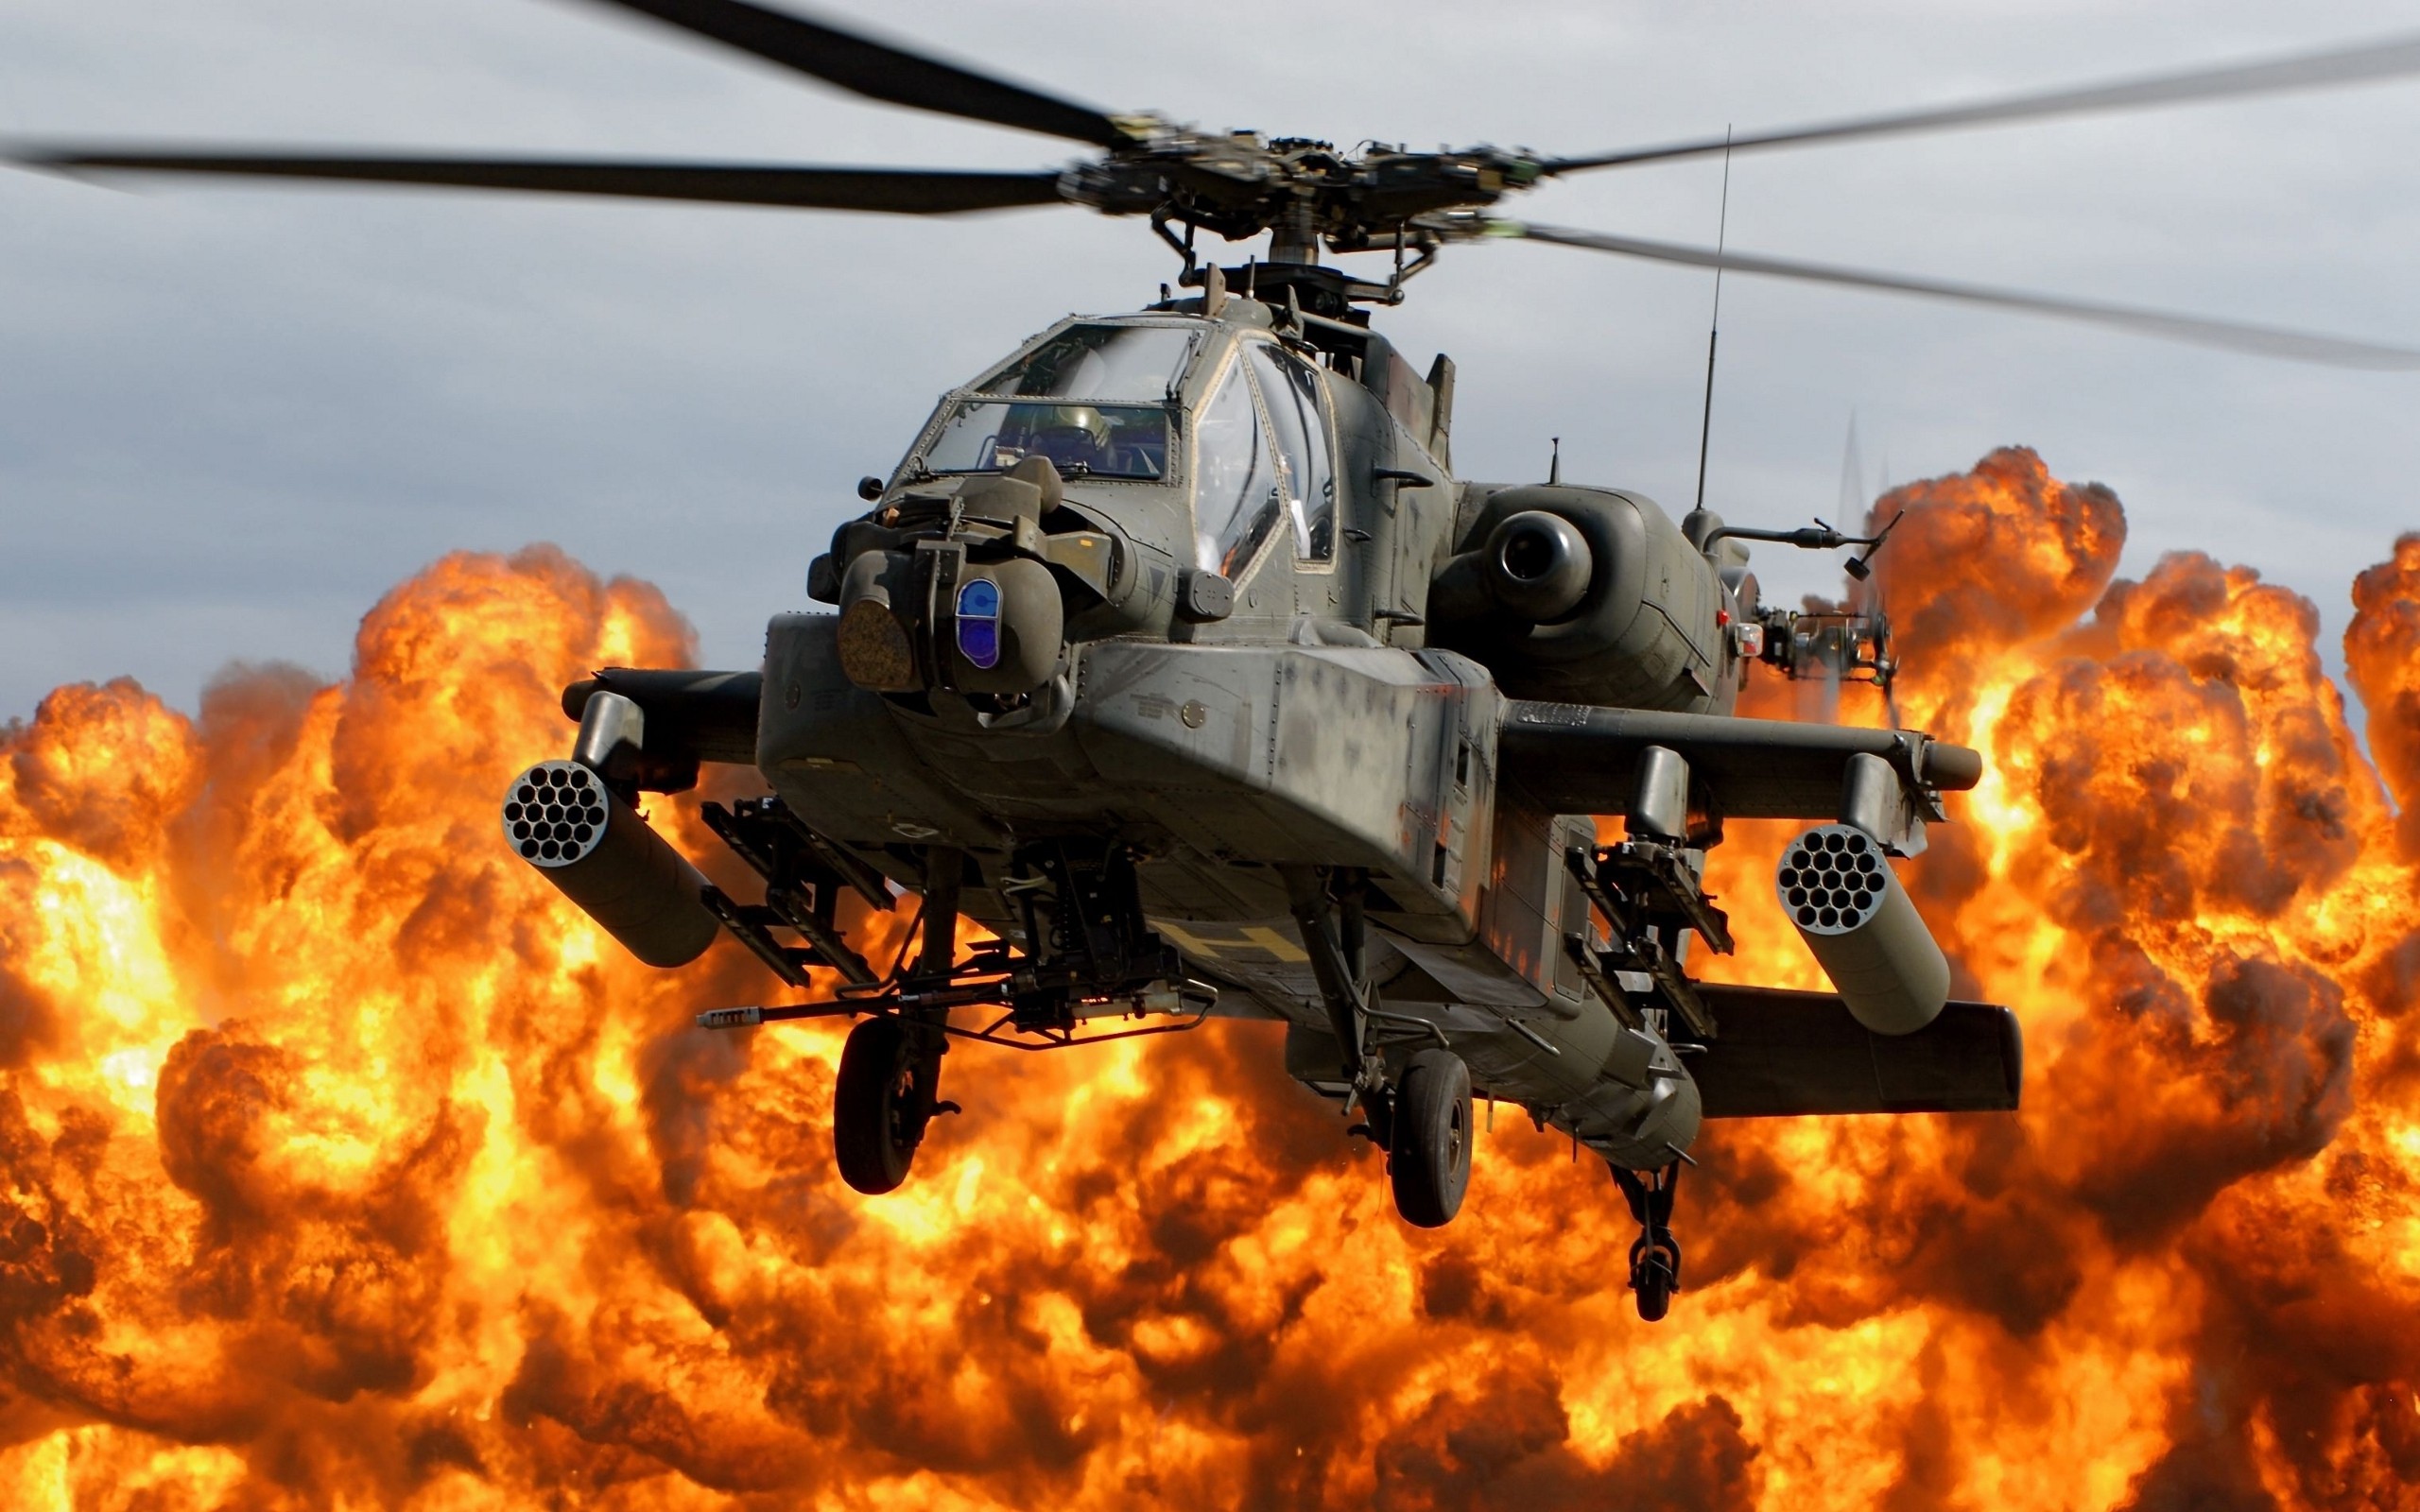 General 2560x1600 military helicopters Boeing AH-64 Apache vehicle attack helicopters military aircraft aircraft military vehicle Boeing American aircraft pilot explosion frontal view